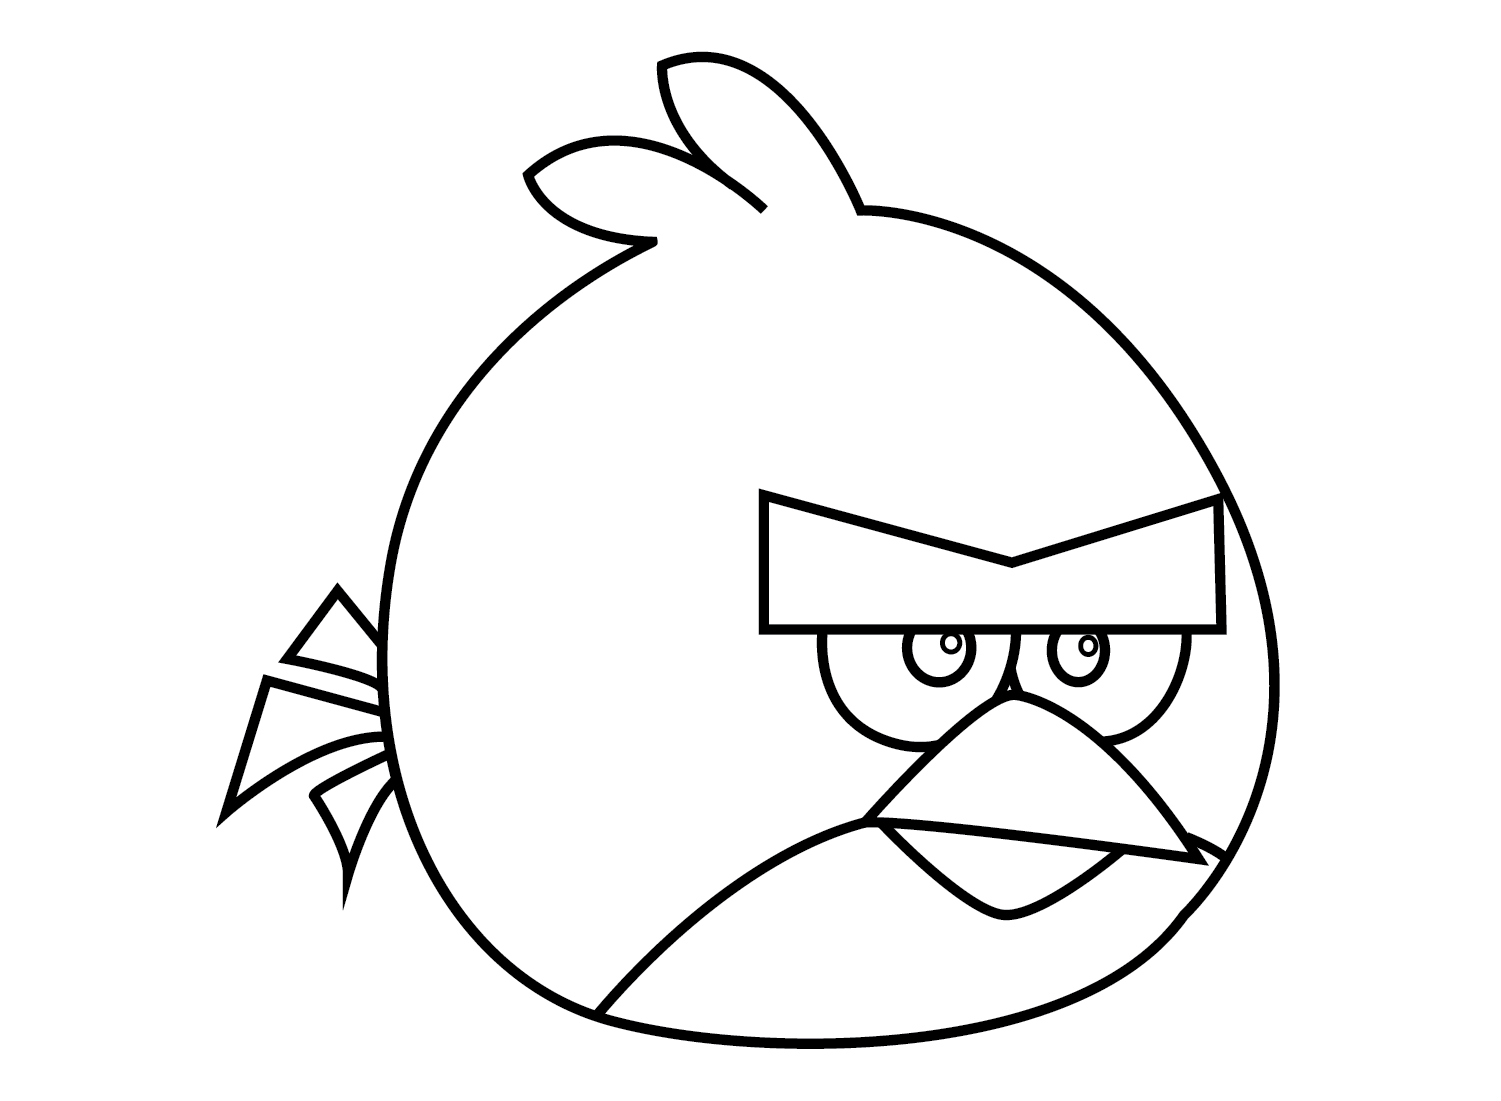 Red (Angry Bird) Adorable Coloring Page - Free Printable Coloring Pages